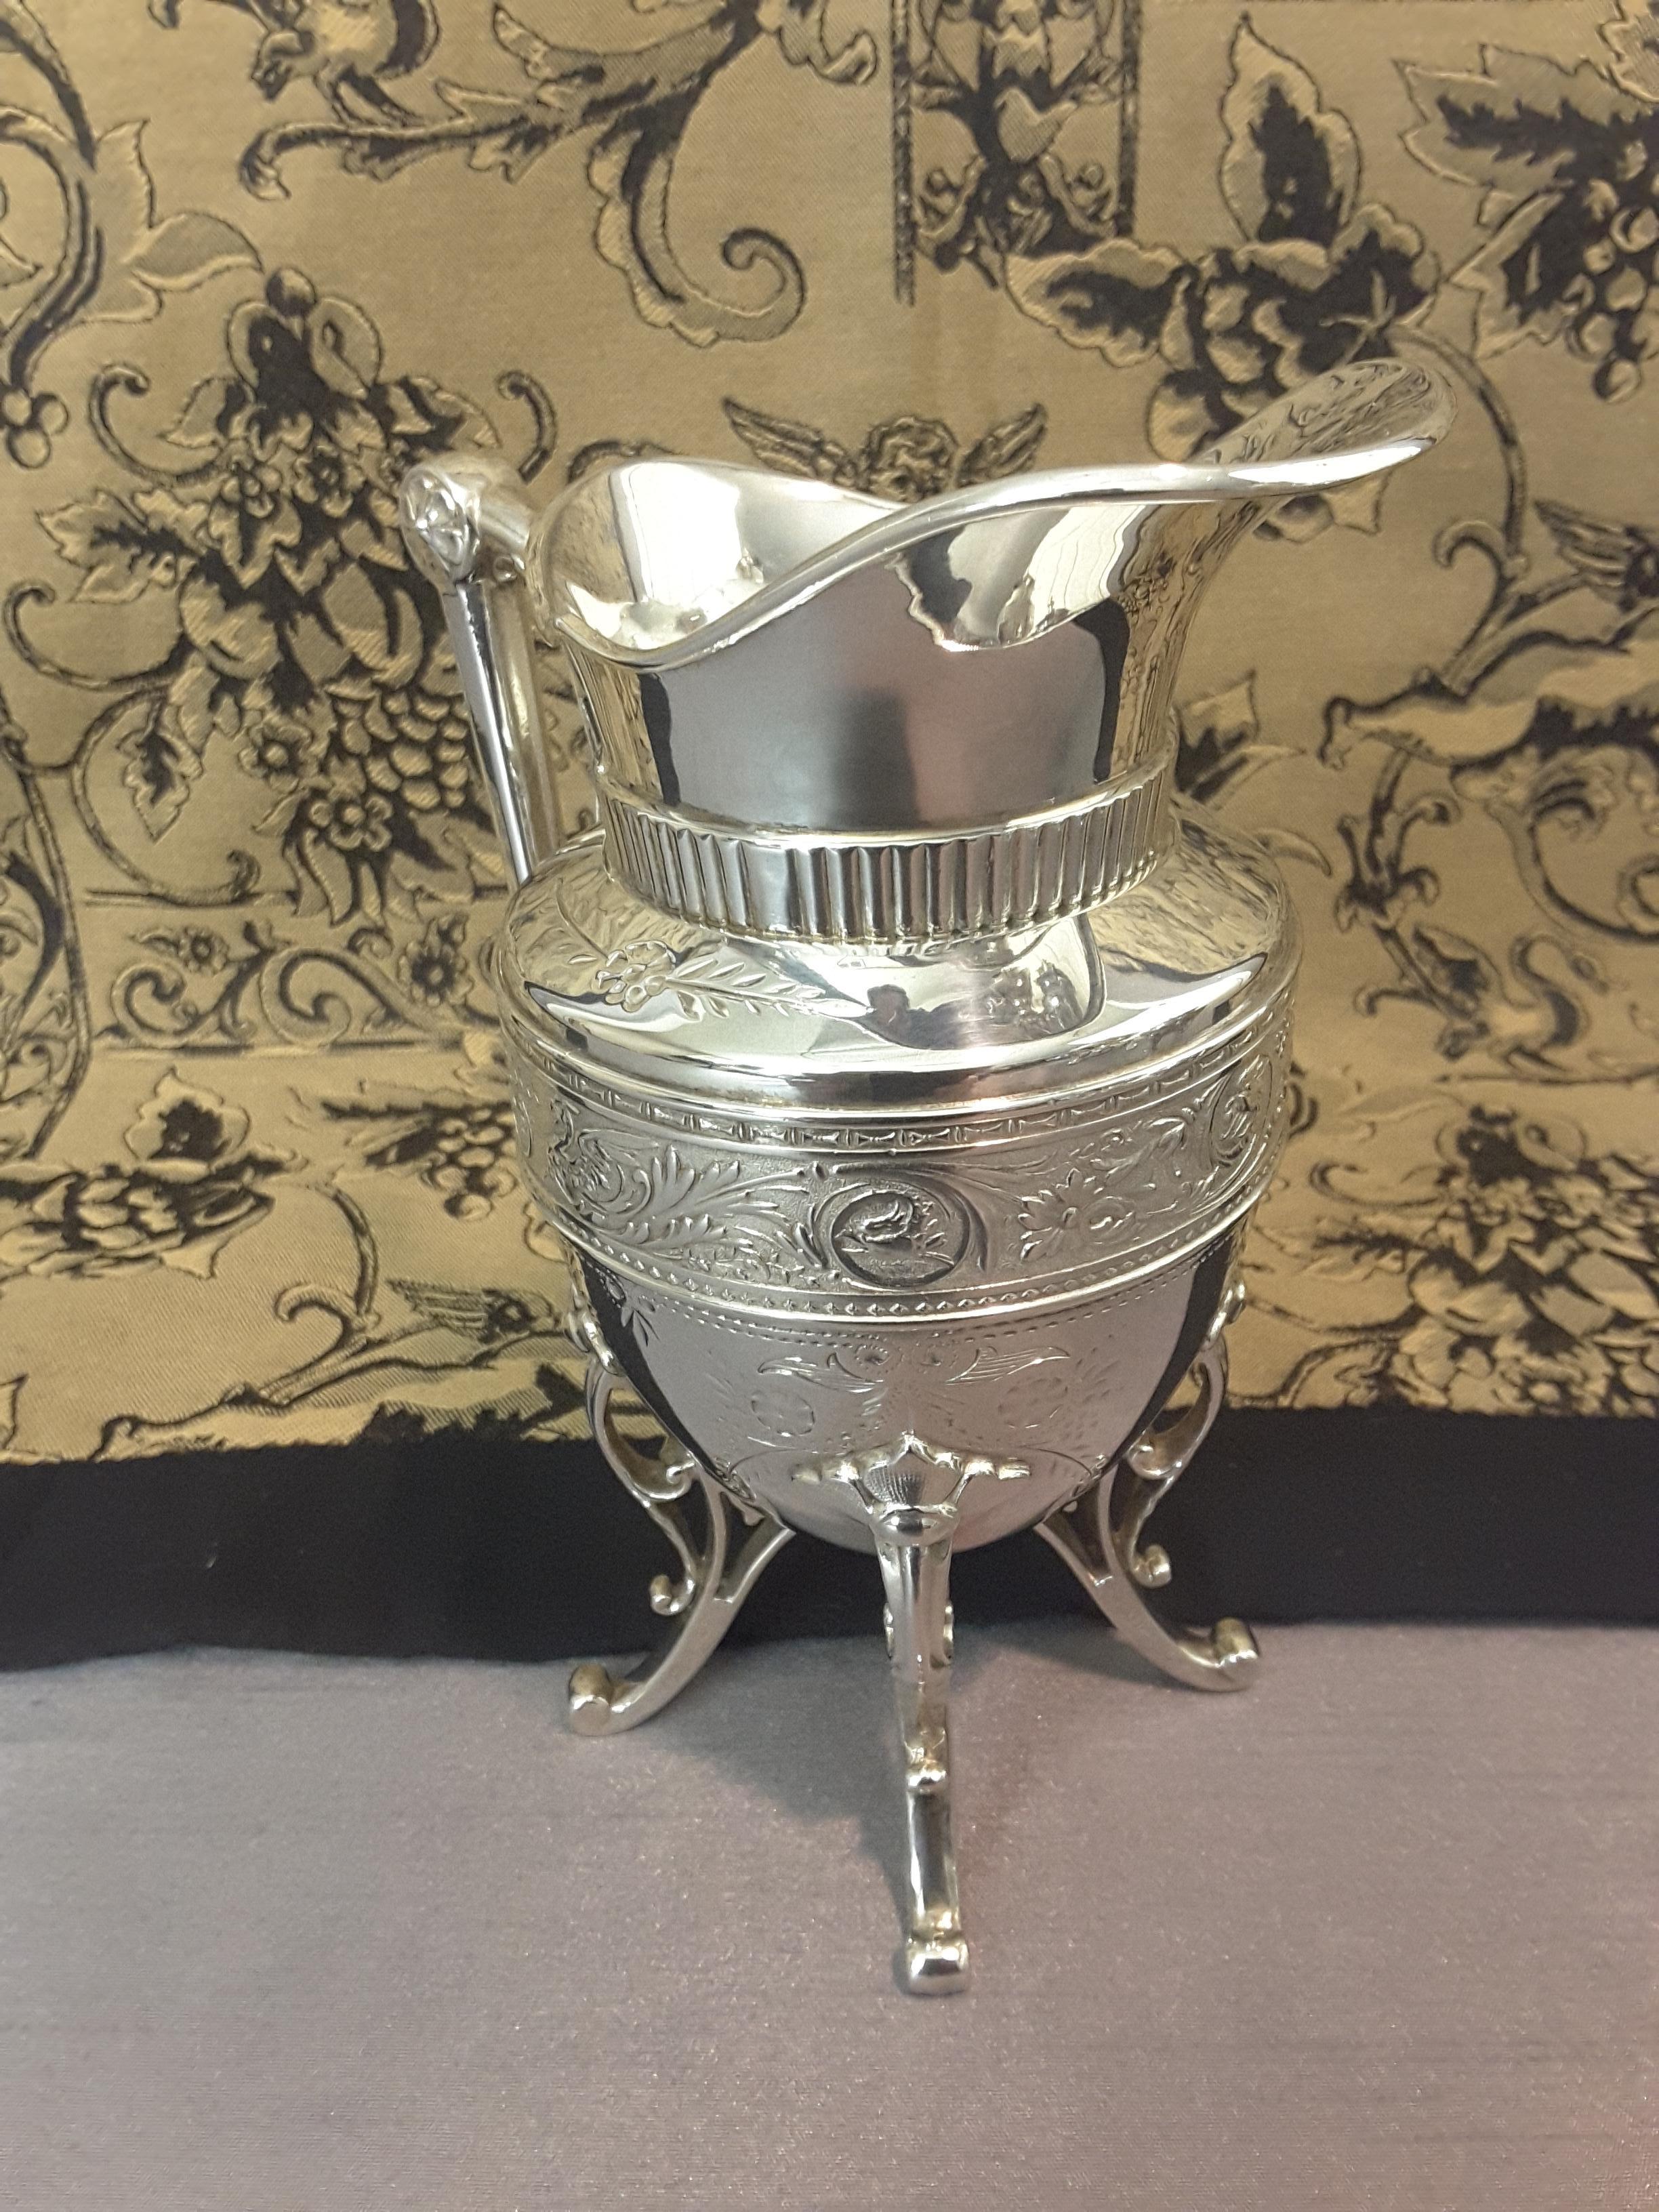 Exquisite Aesthetic Movement Silverplated Tea Service by Simpson, Hall & Miller For Sale 7